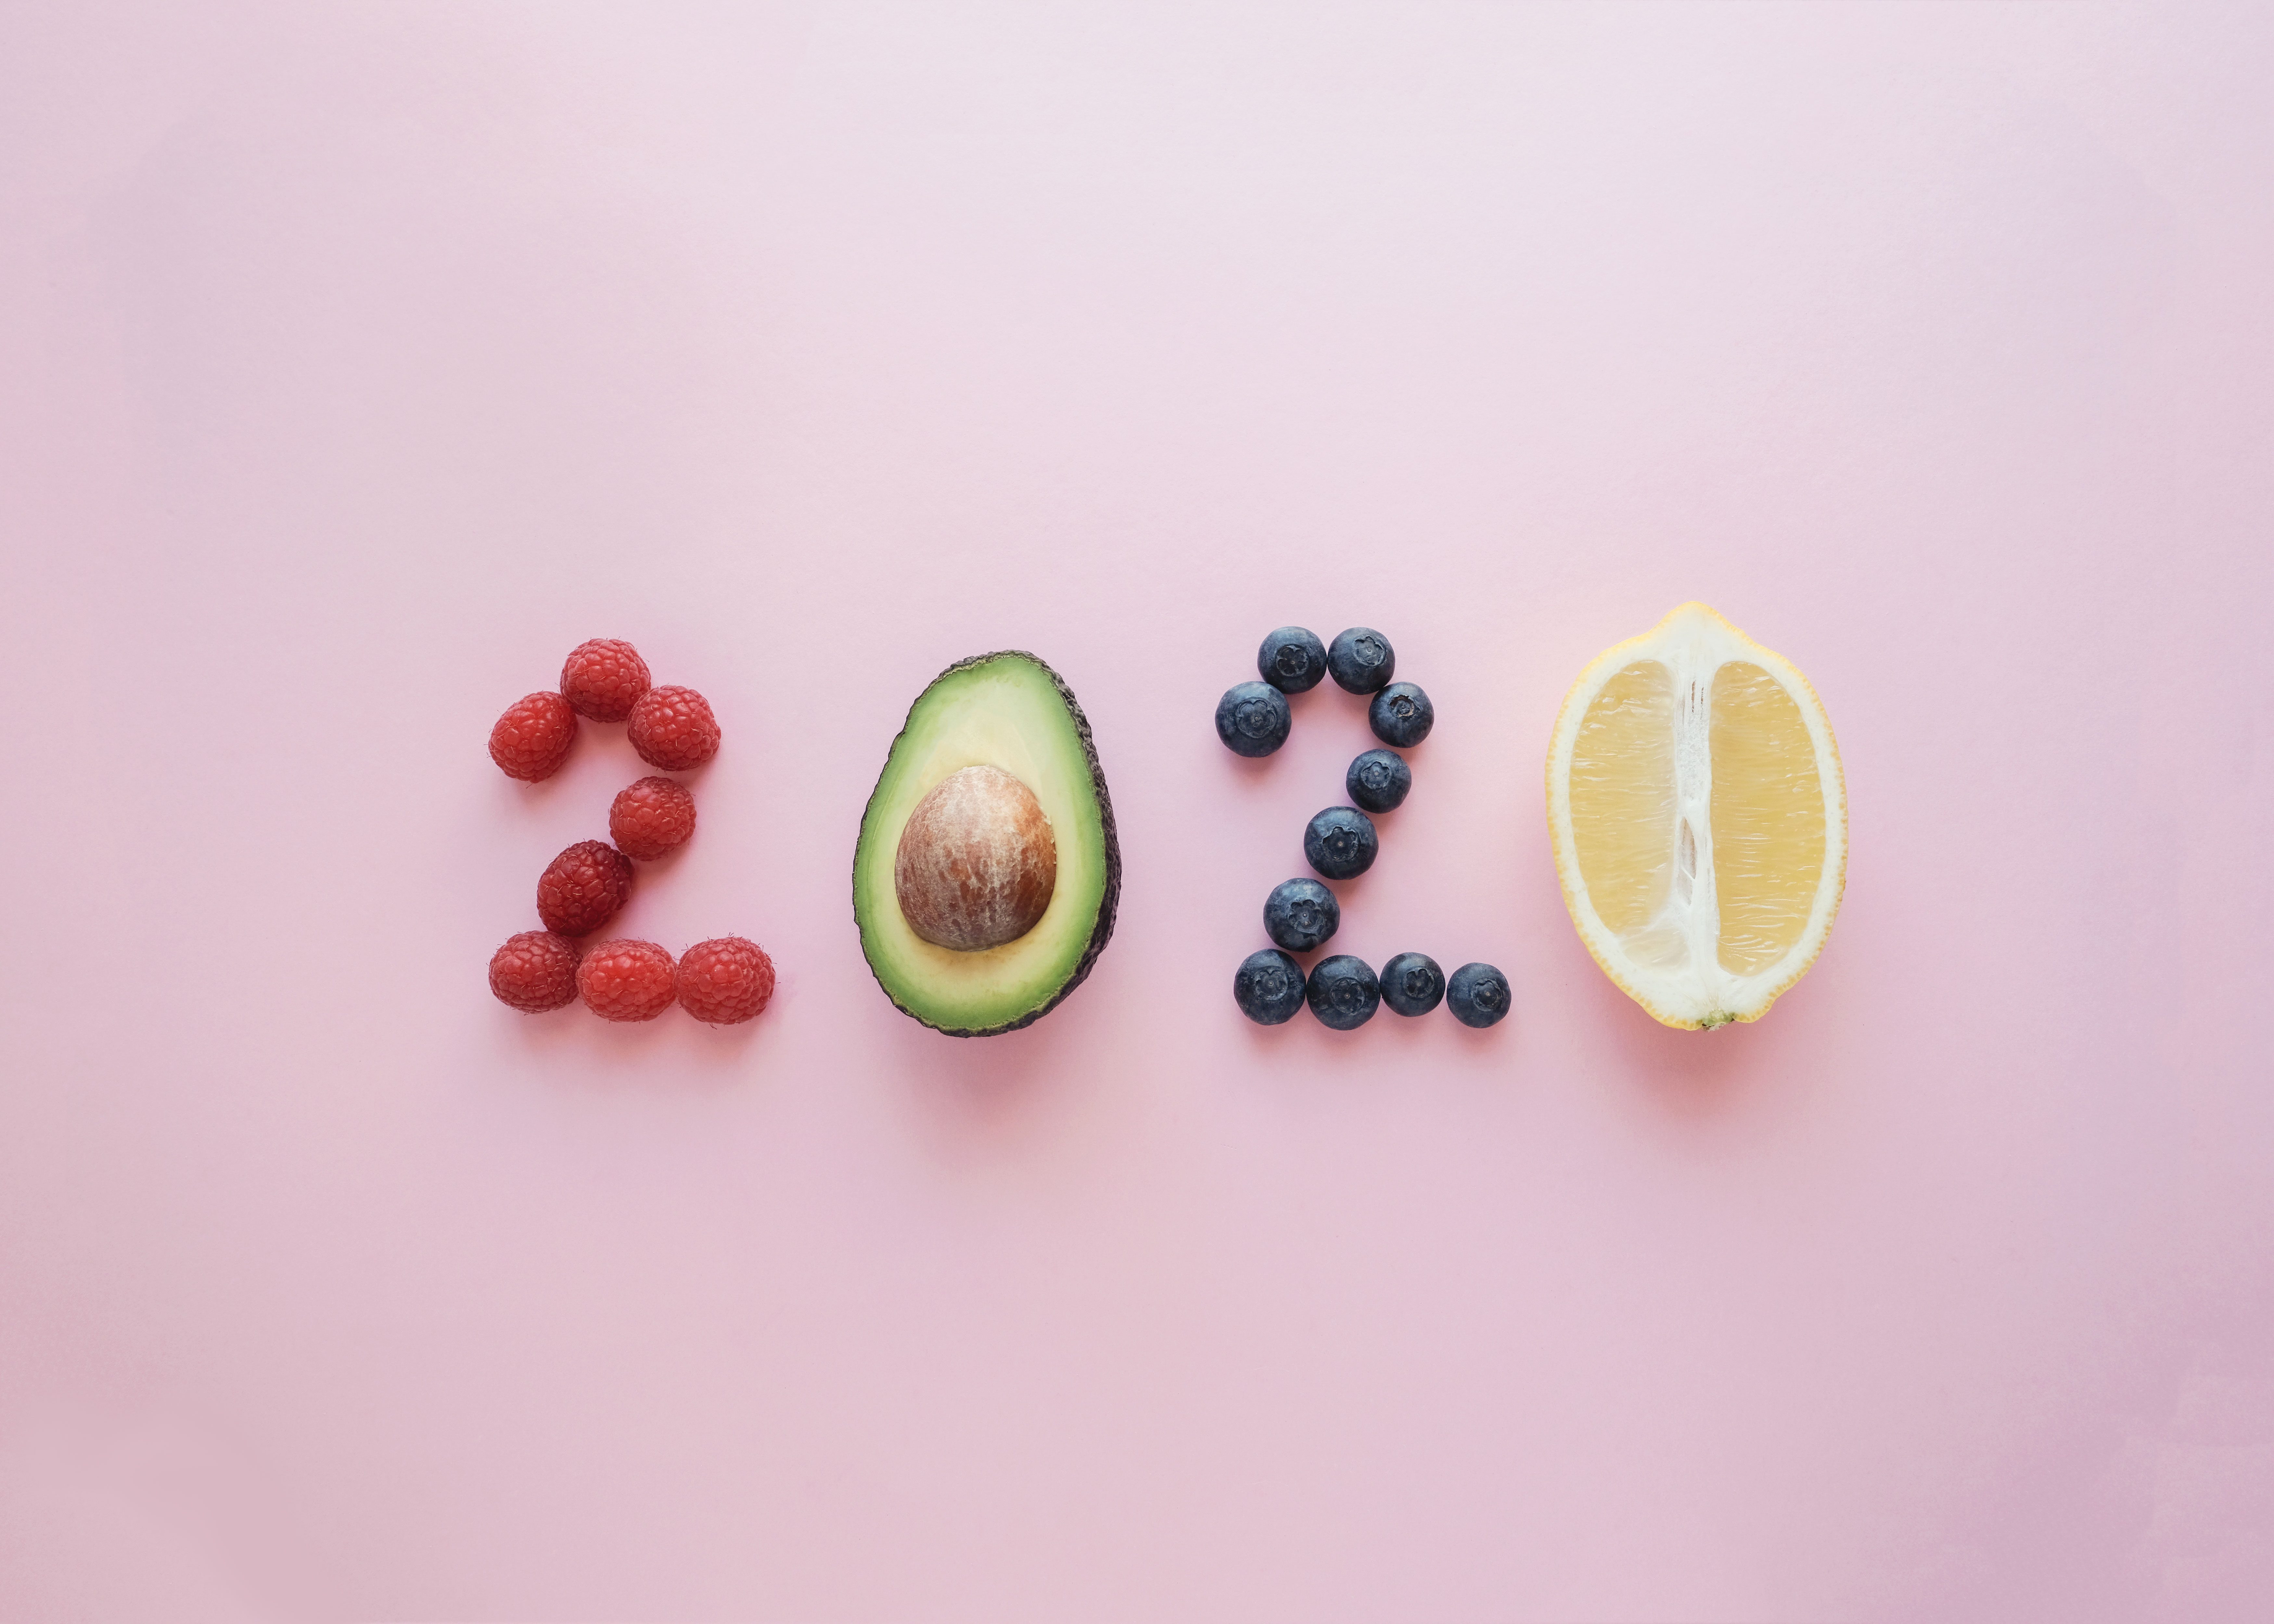 11 Healthy Food Trends That Will Be Everywhere in 2020